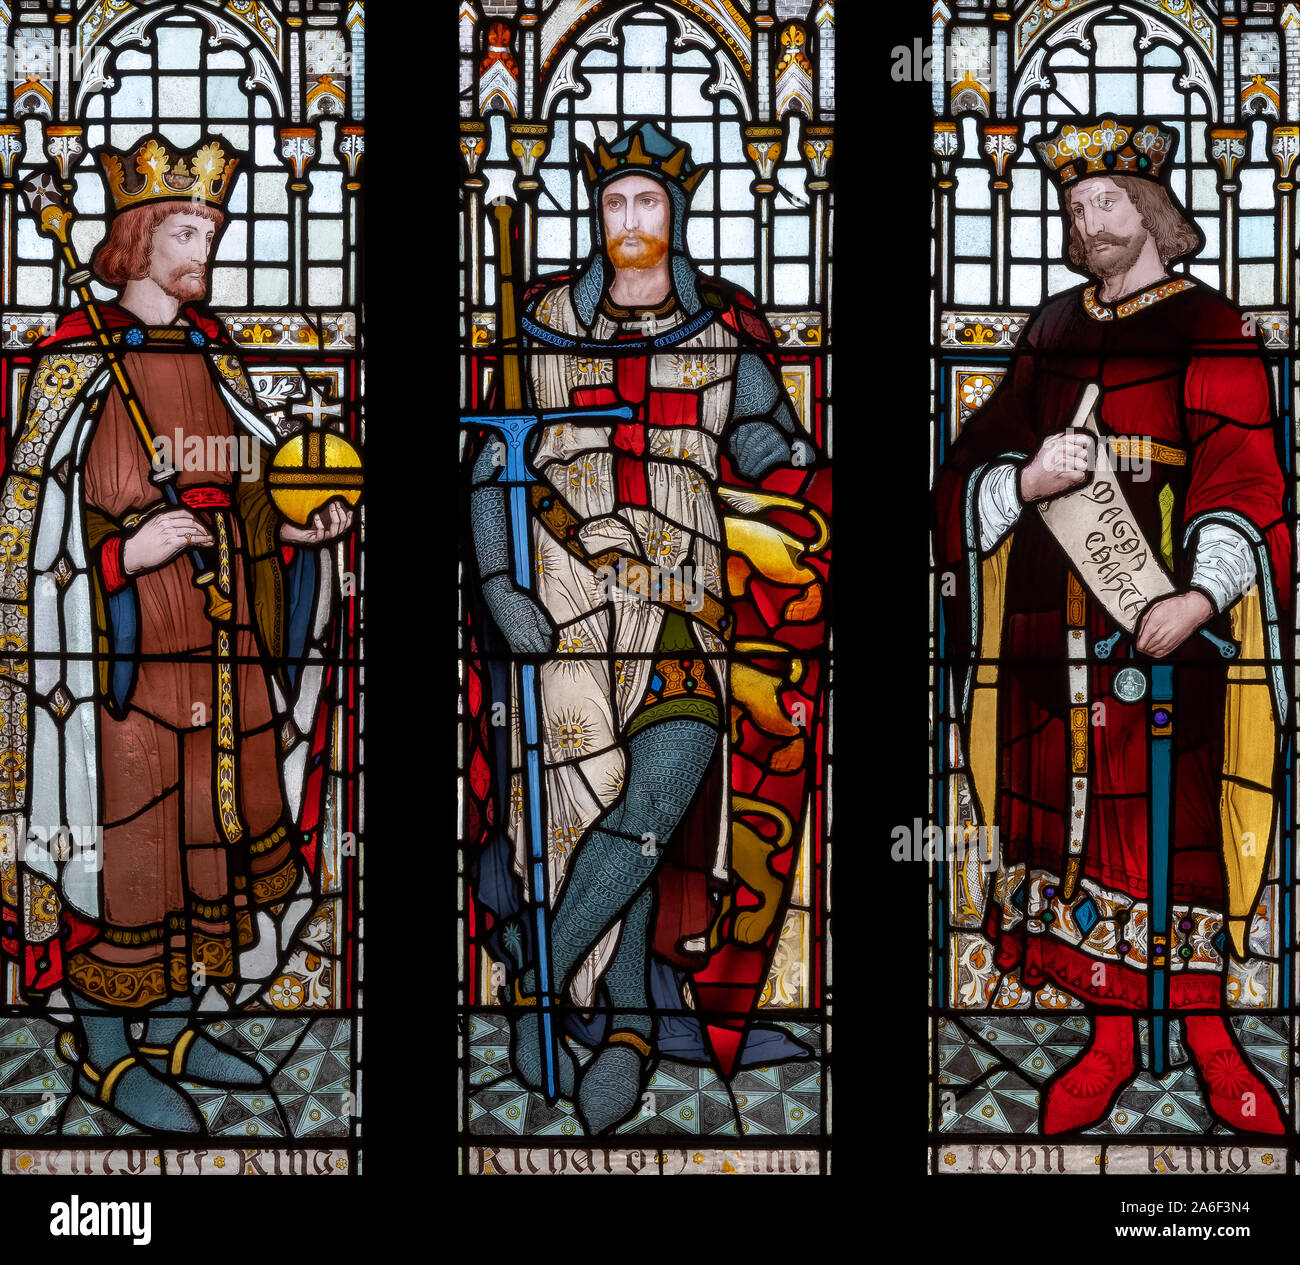 English Monarchs of the 12th and 13th century depicted by Heaton, Butler and Bayne (1871), Rochdale Town Hall, Greater Manchester, UK Stock Photo